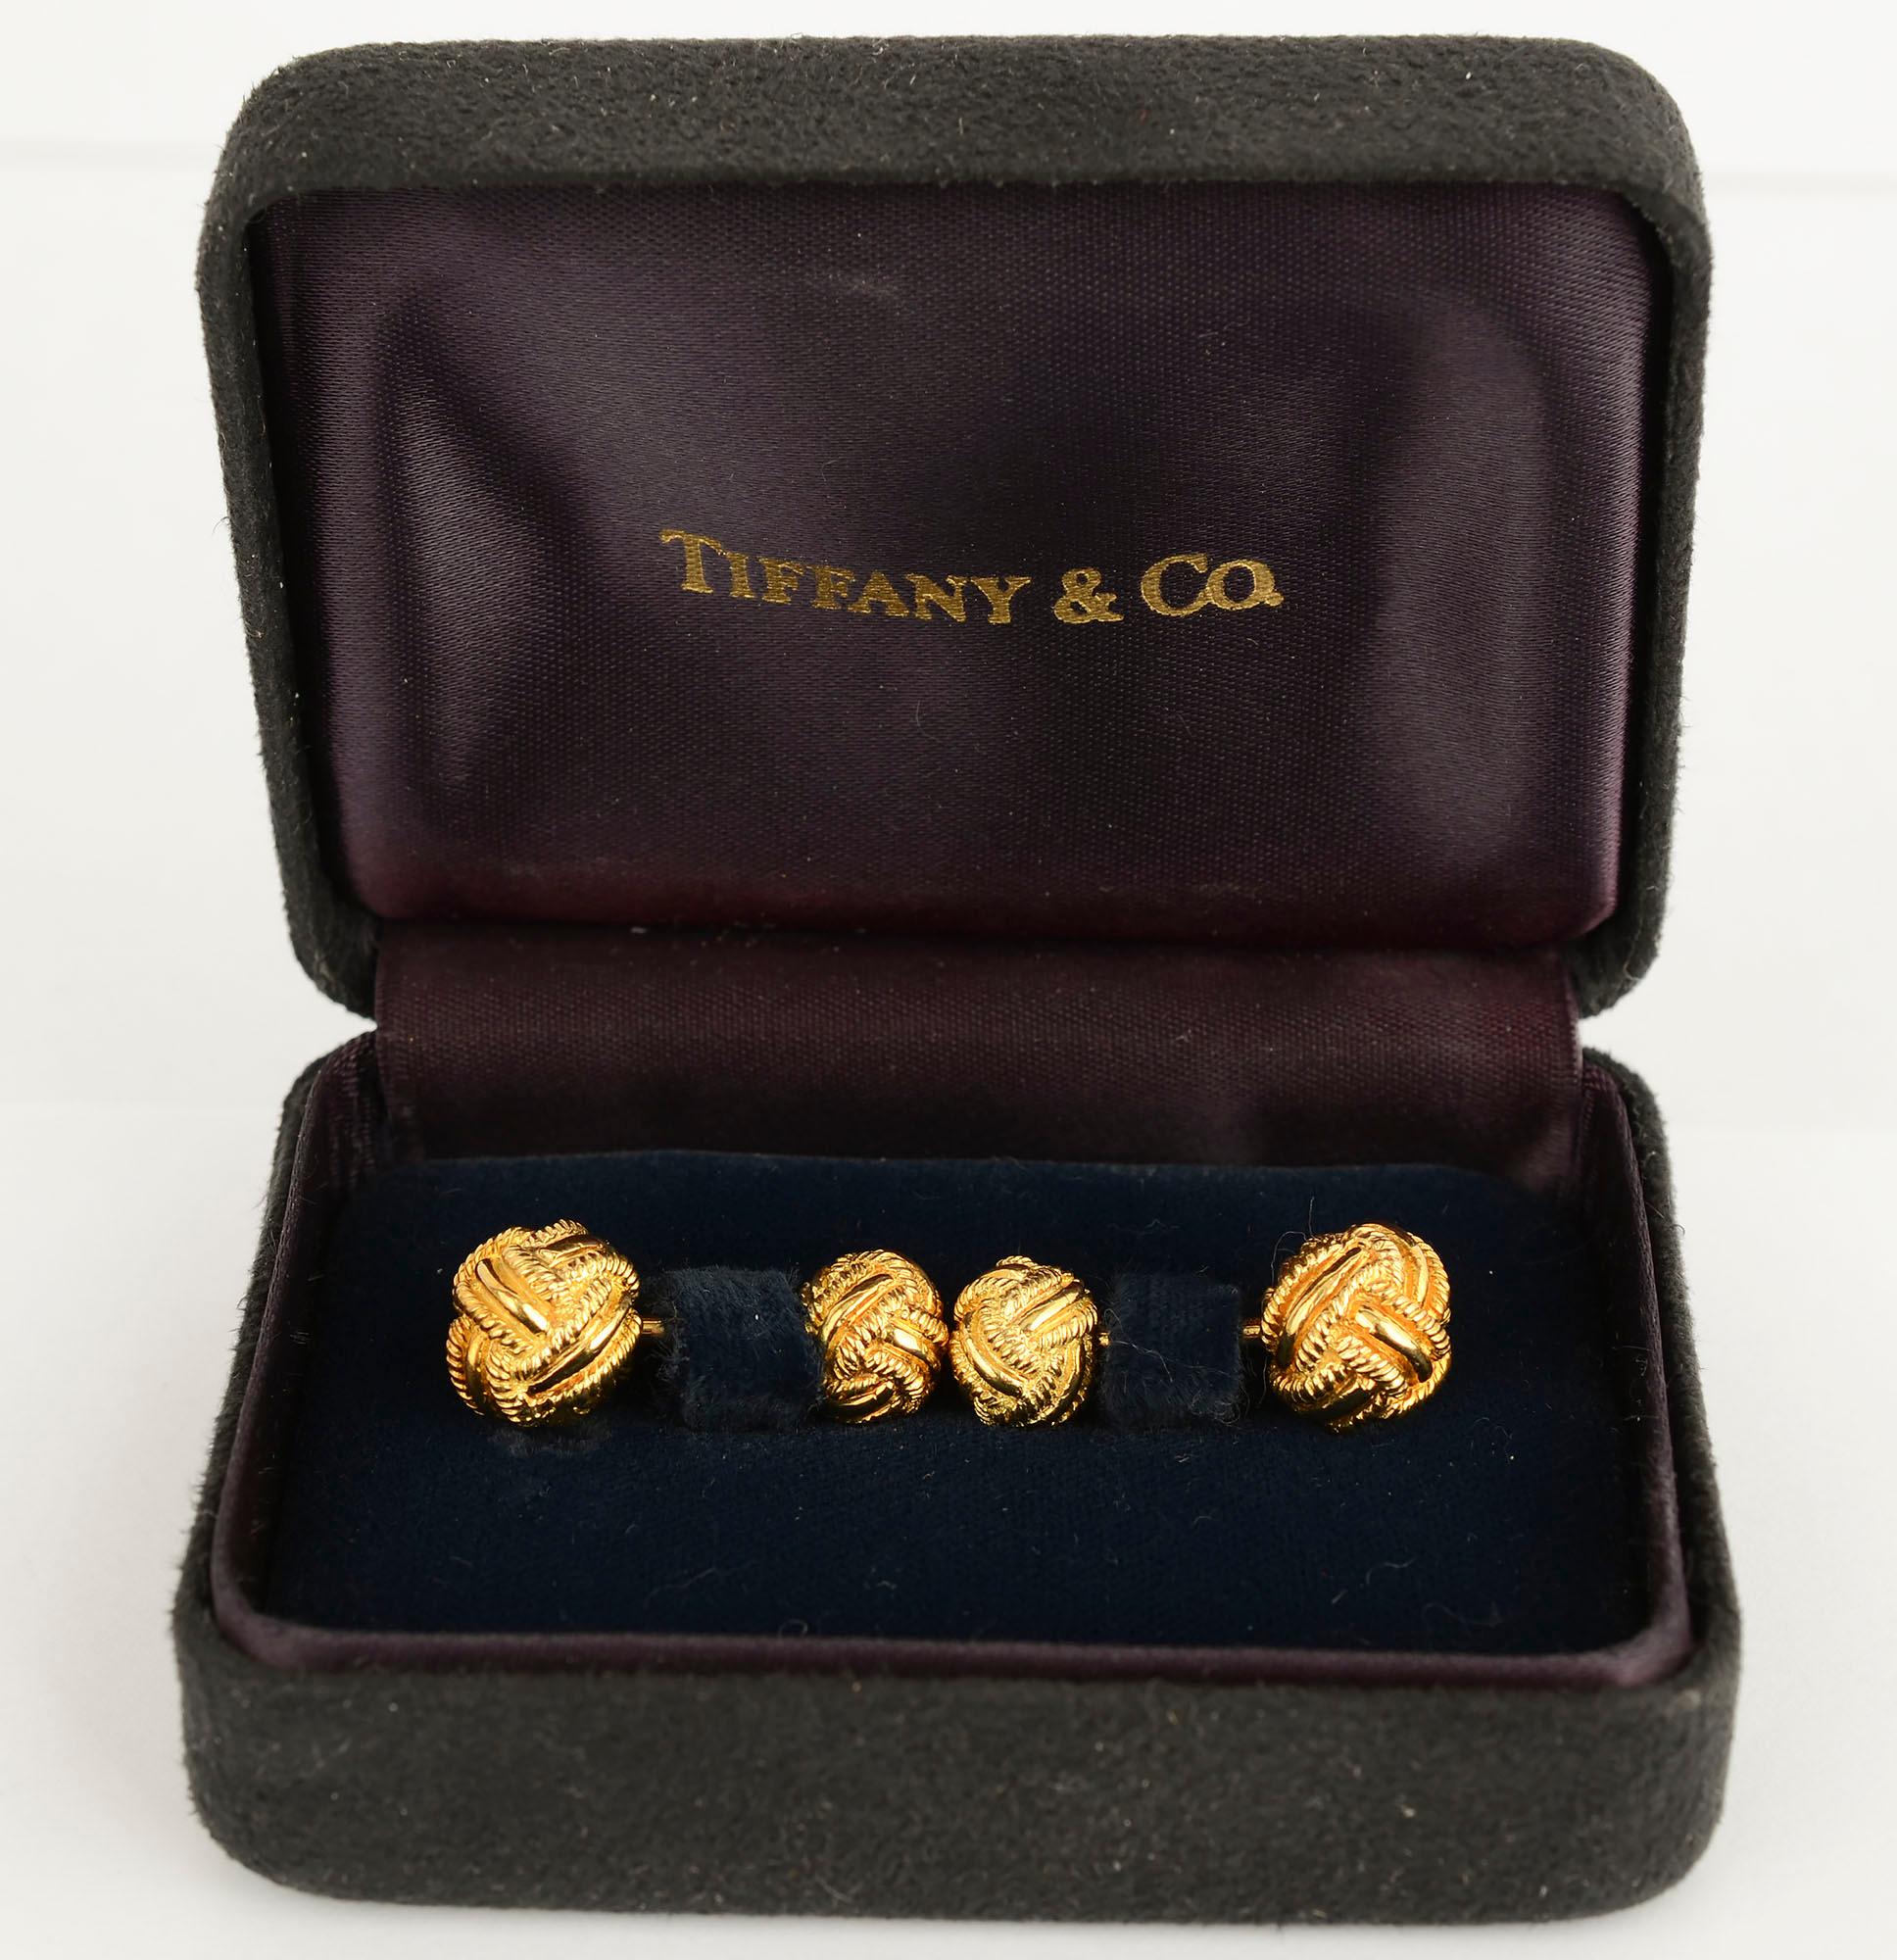 Schlumberger for Tiffany elegant gold knot cufflinks. Smooth strands of gold alternate with twisted gold to create each ball. The larger ball is 3/8